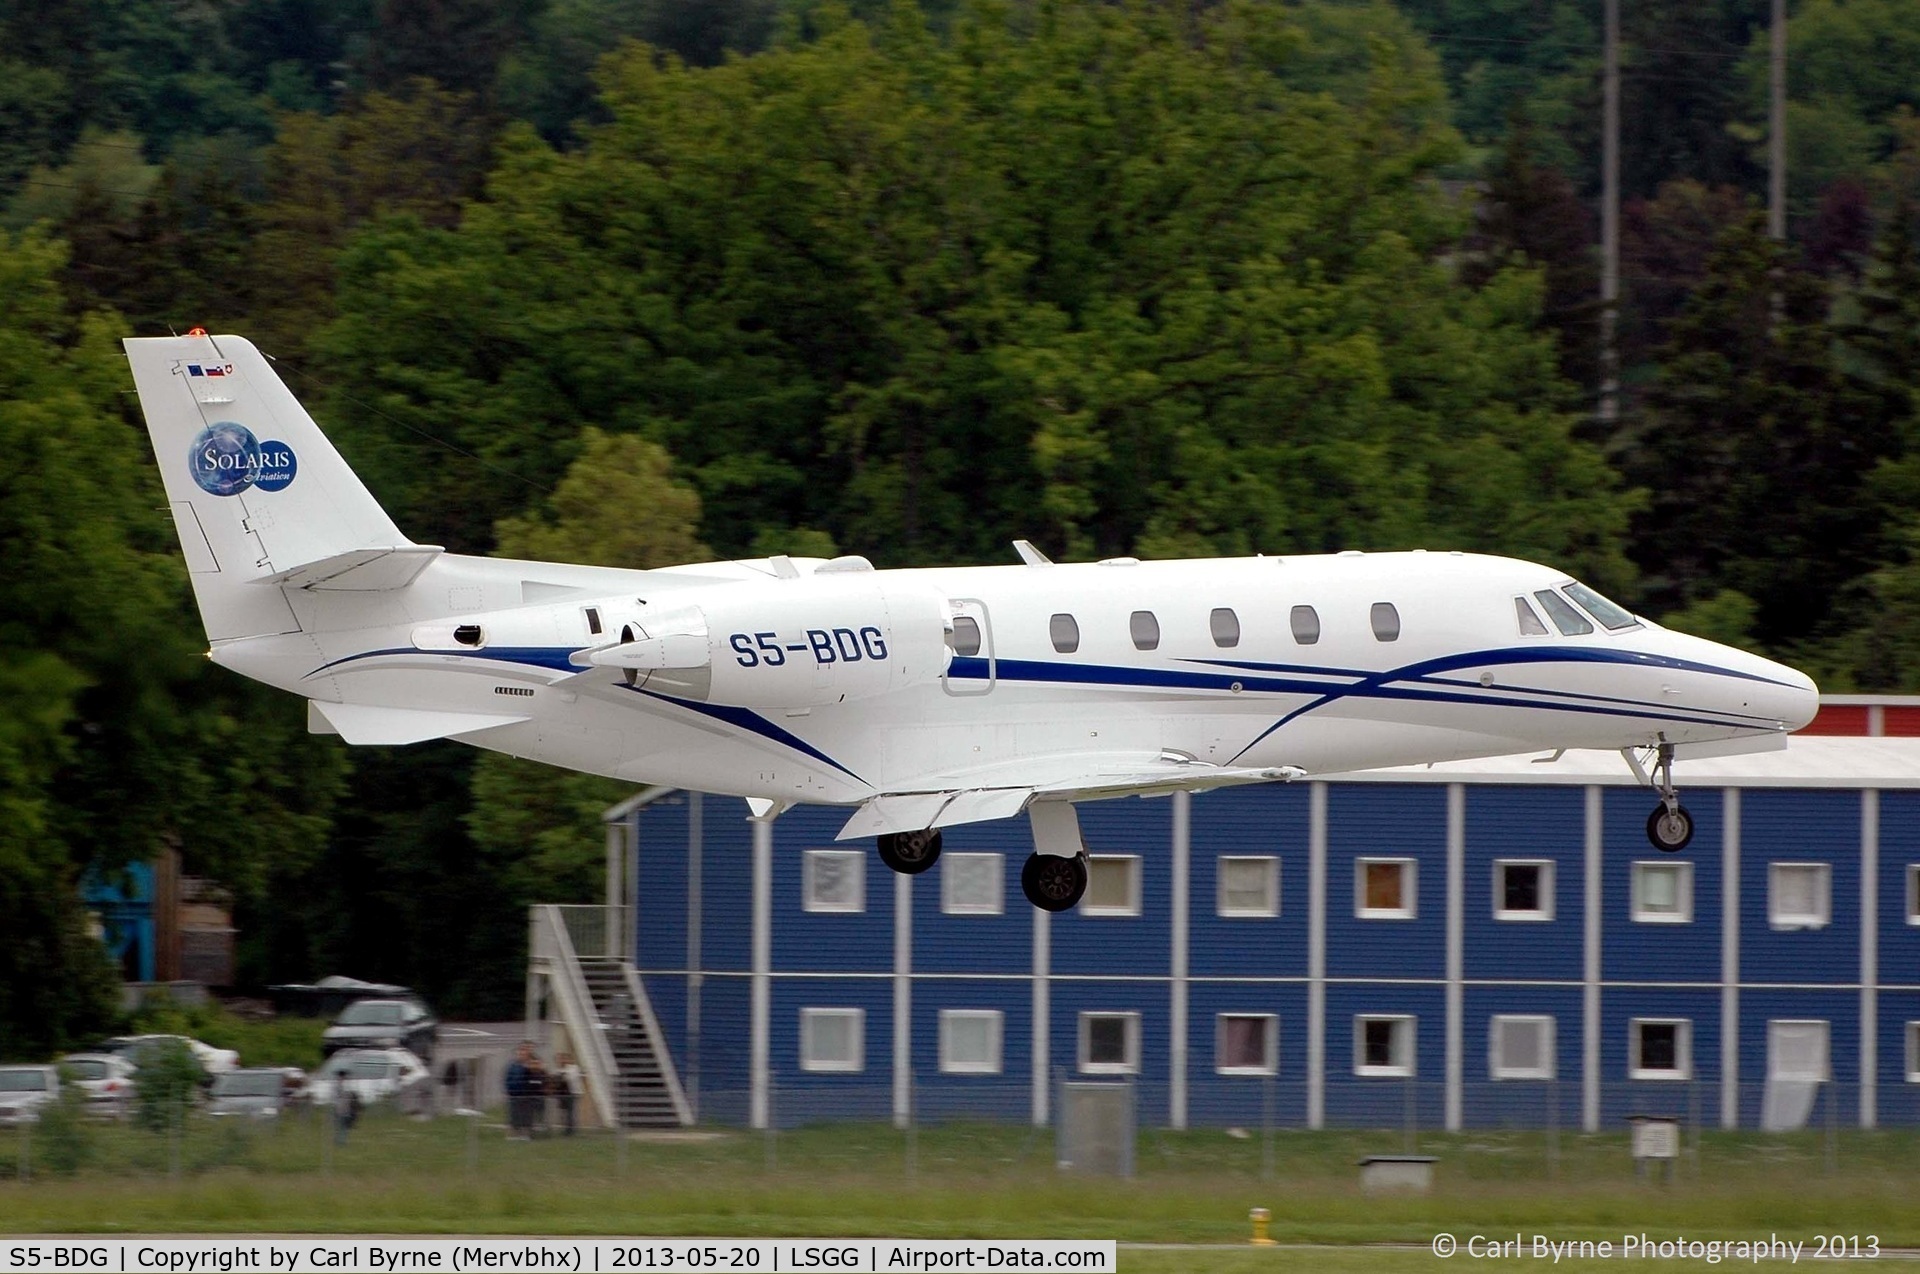 S5-BDG, 2001 Cessna 560XL Citation C/N 560-5215, Taken from the park at the 05 threshold.